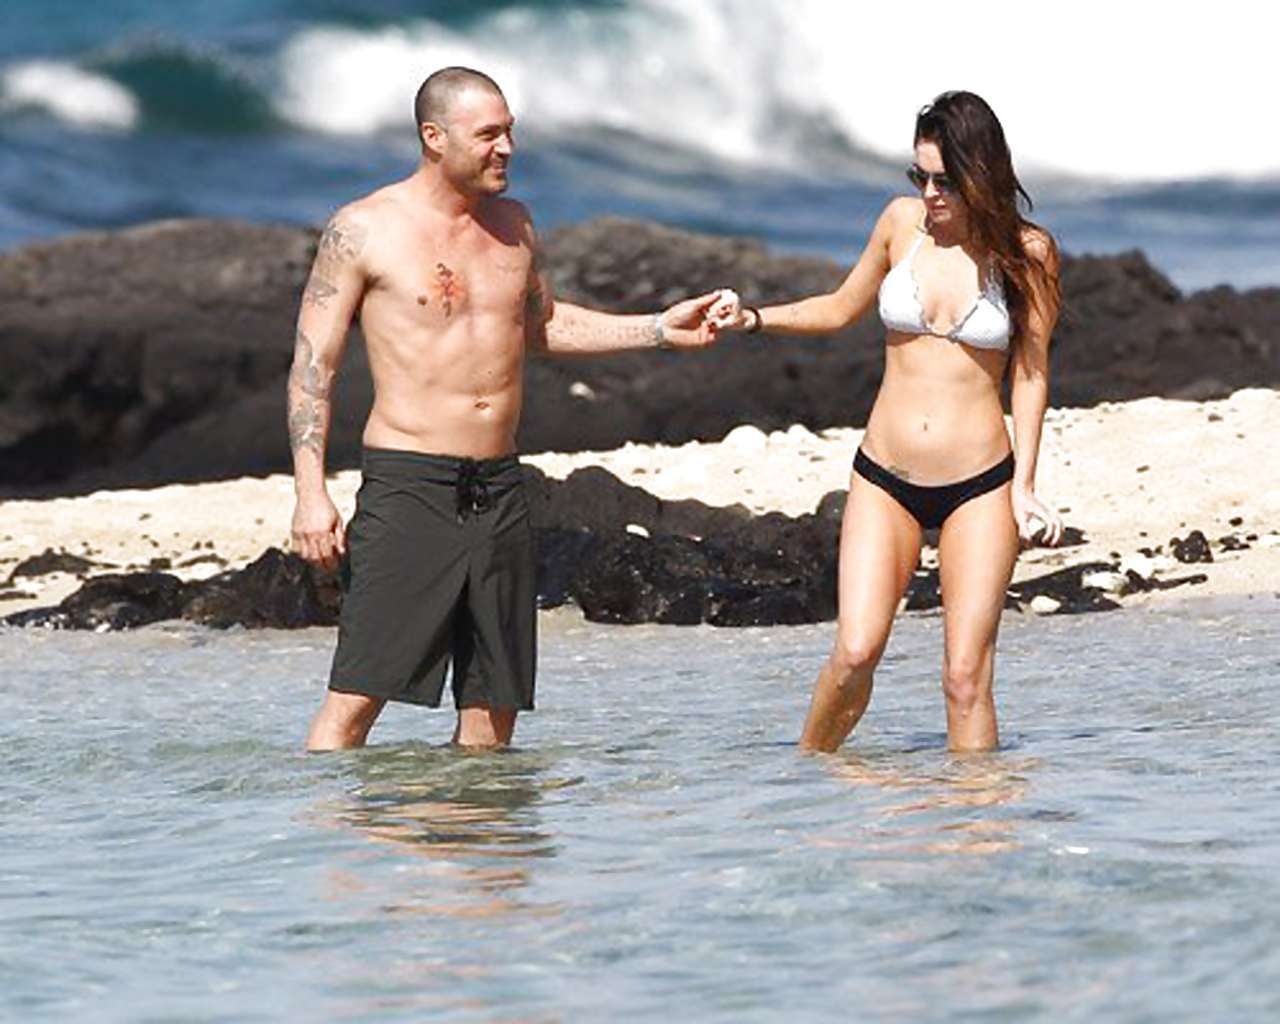 Megan fox showing her sexy body curves in bikini paparazzi pictures
 #75273340